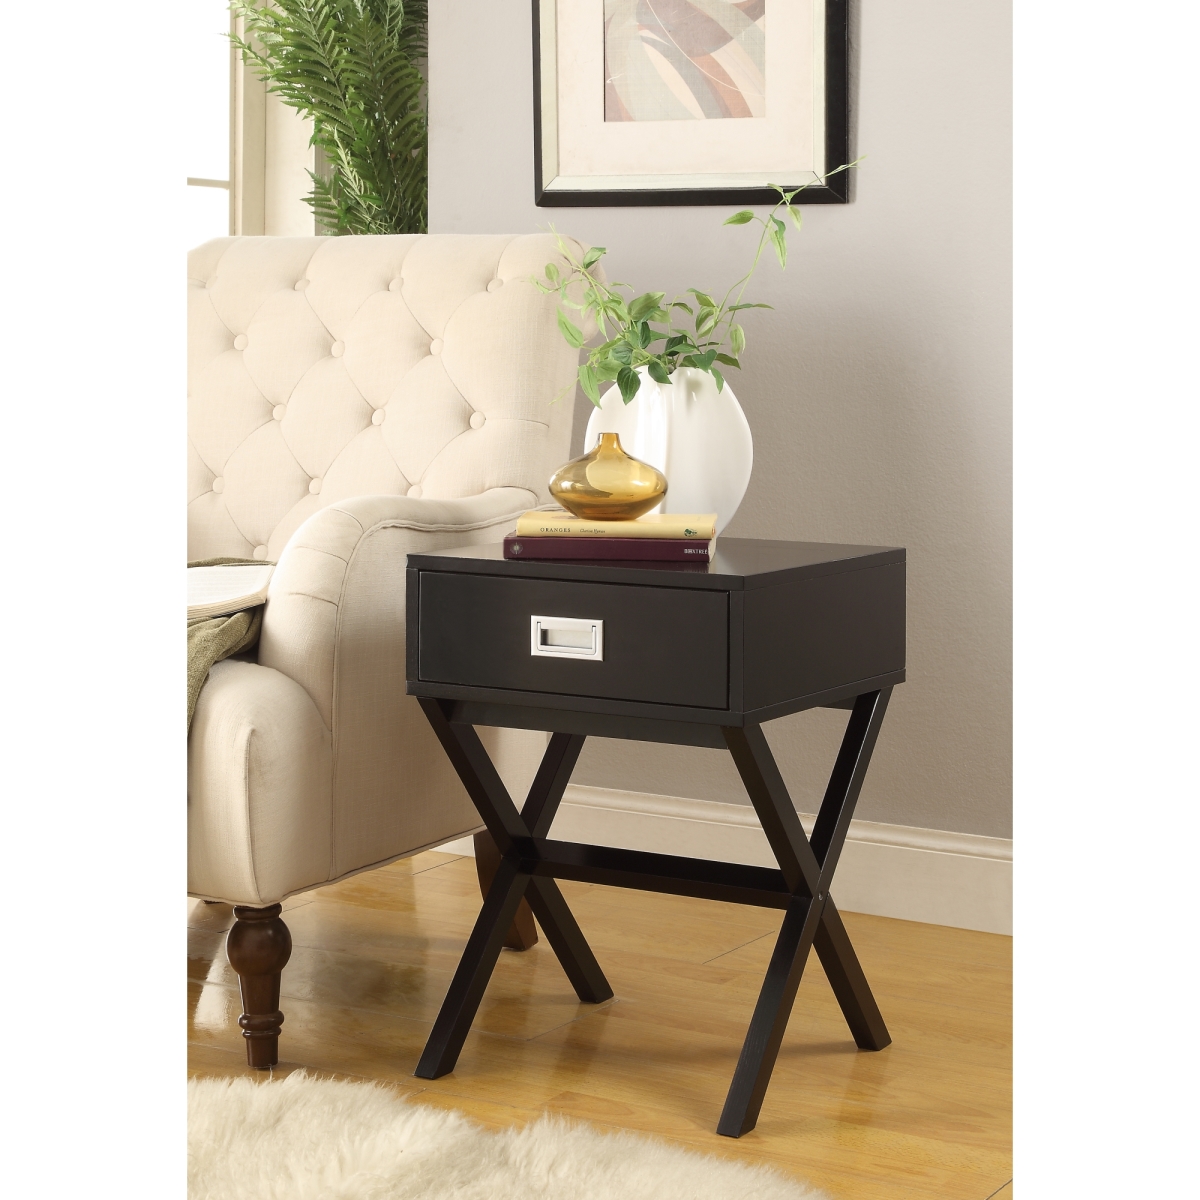 Whif626 X-leg Accent End Table With Storage, Black